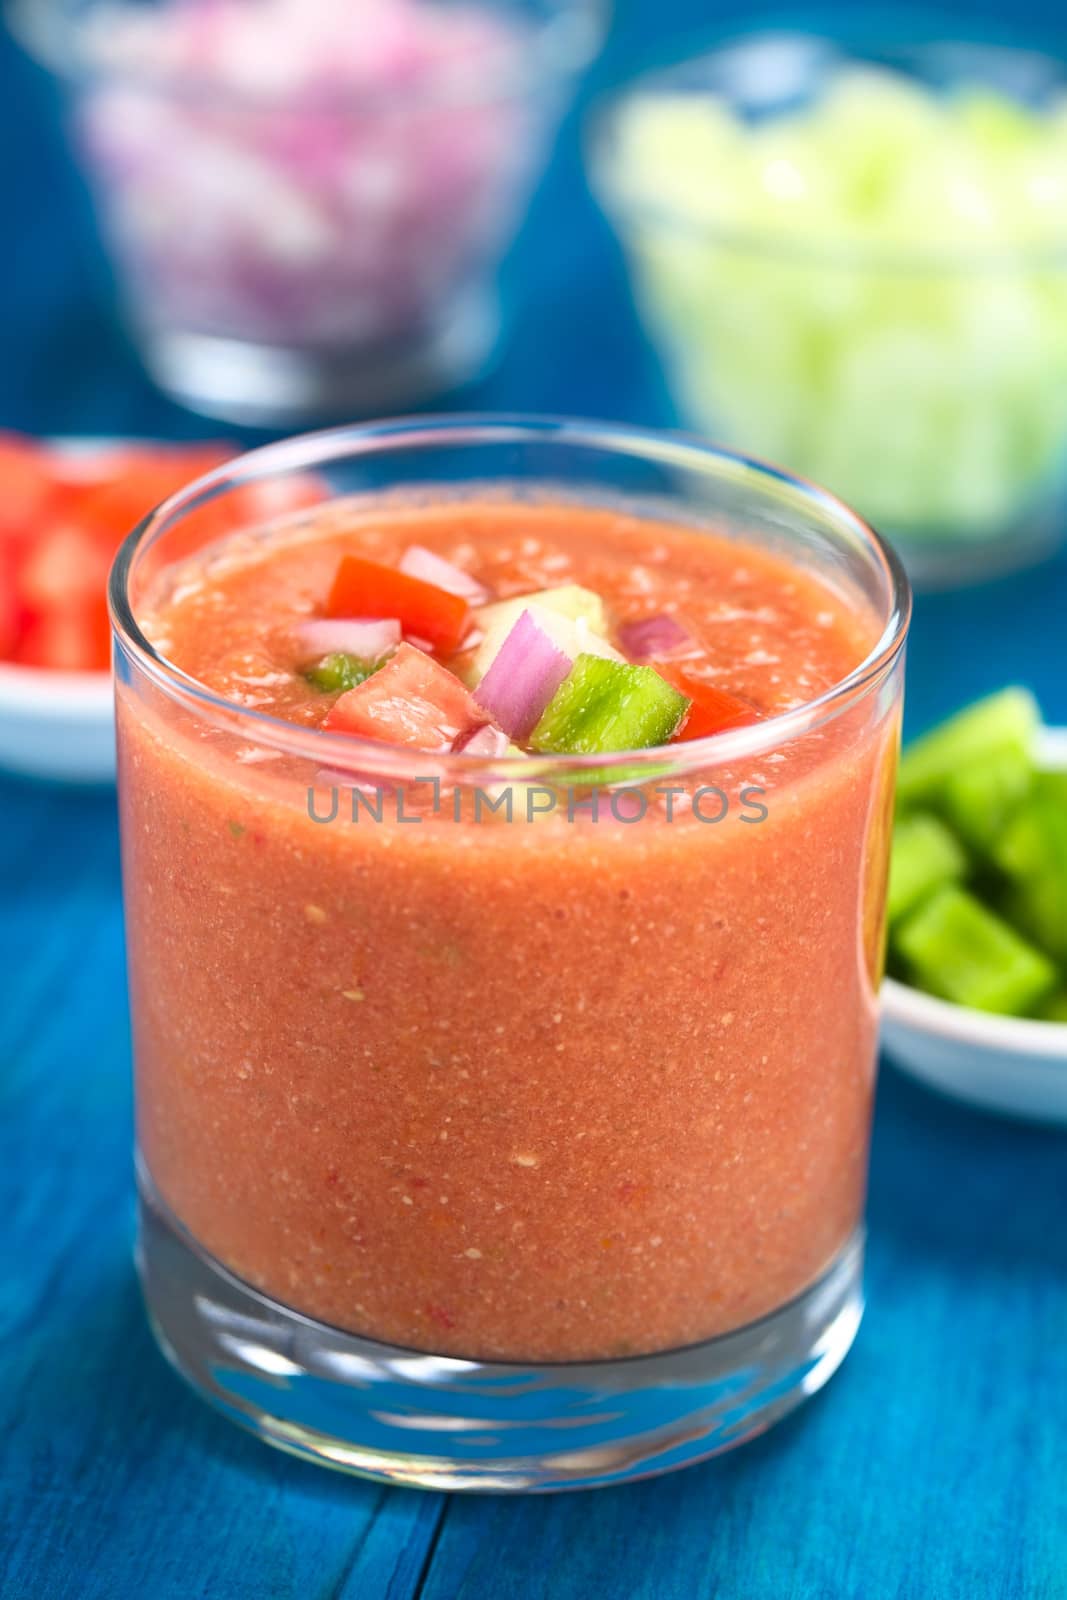 Spanish Cold Vegetable Soup Called Gazpacho by ildi